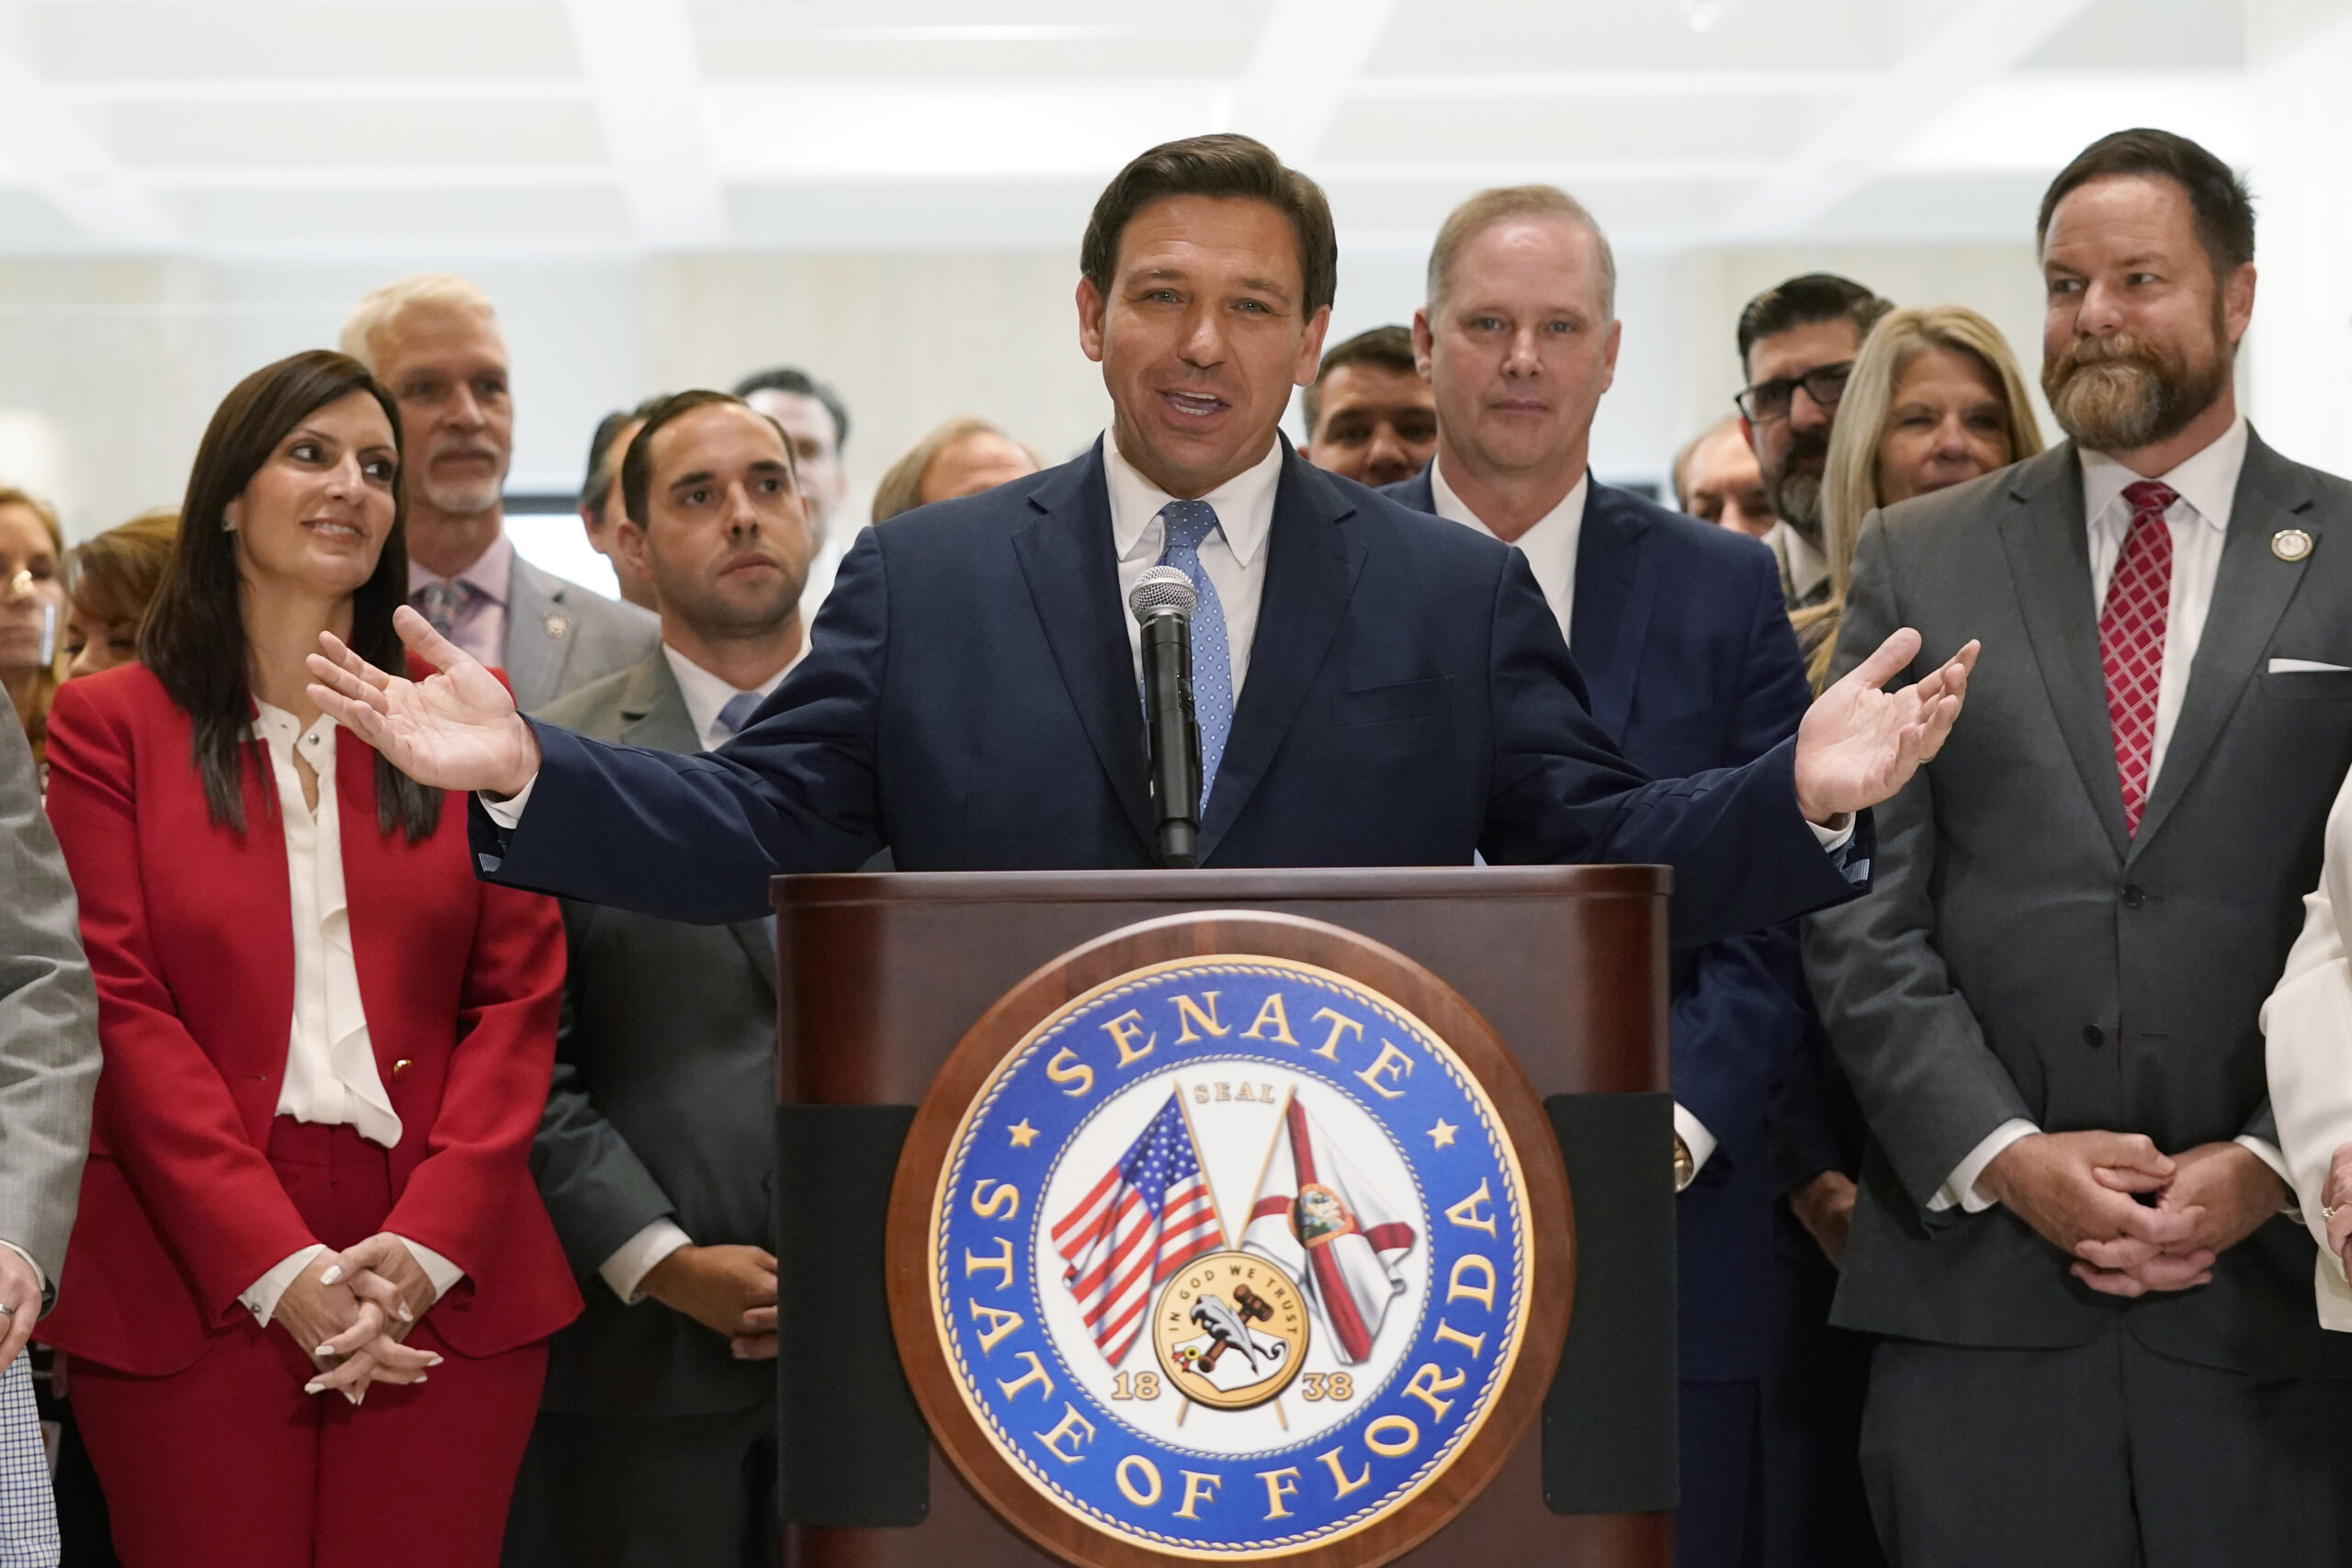 Surrounded by lawmakers, Florida Gov.Ron DeSantis speaks at the end of a legislative session, Friday, April 30, 2021, at the Capitol in Tallahassee, Fla. (AP Photo/Wilfredo Lee)